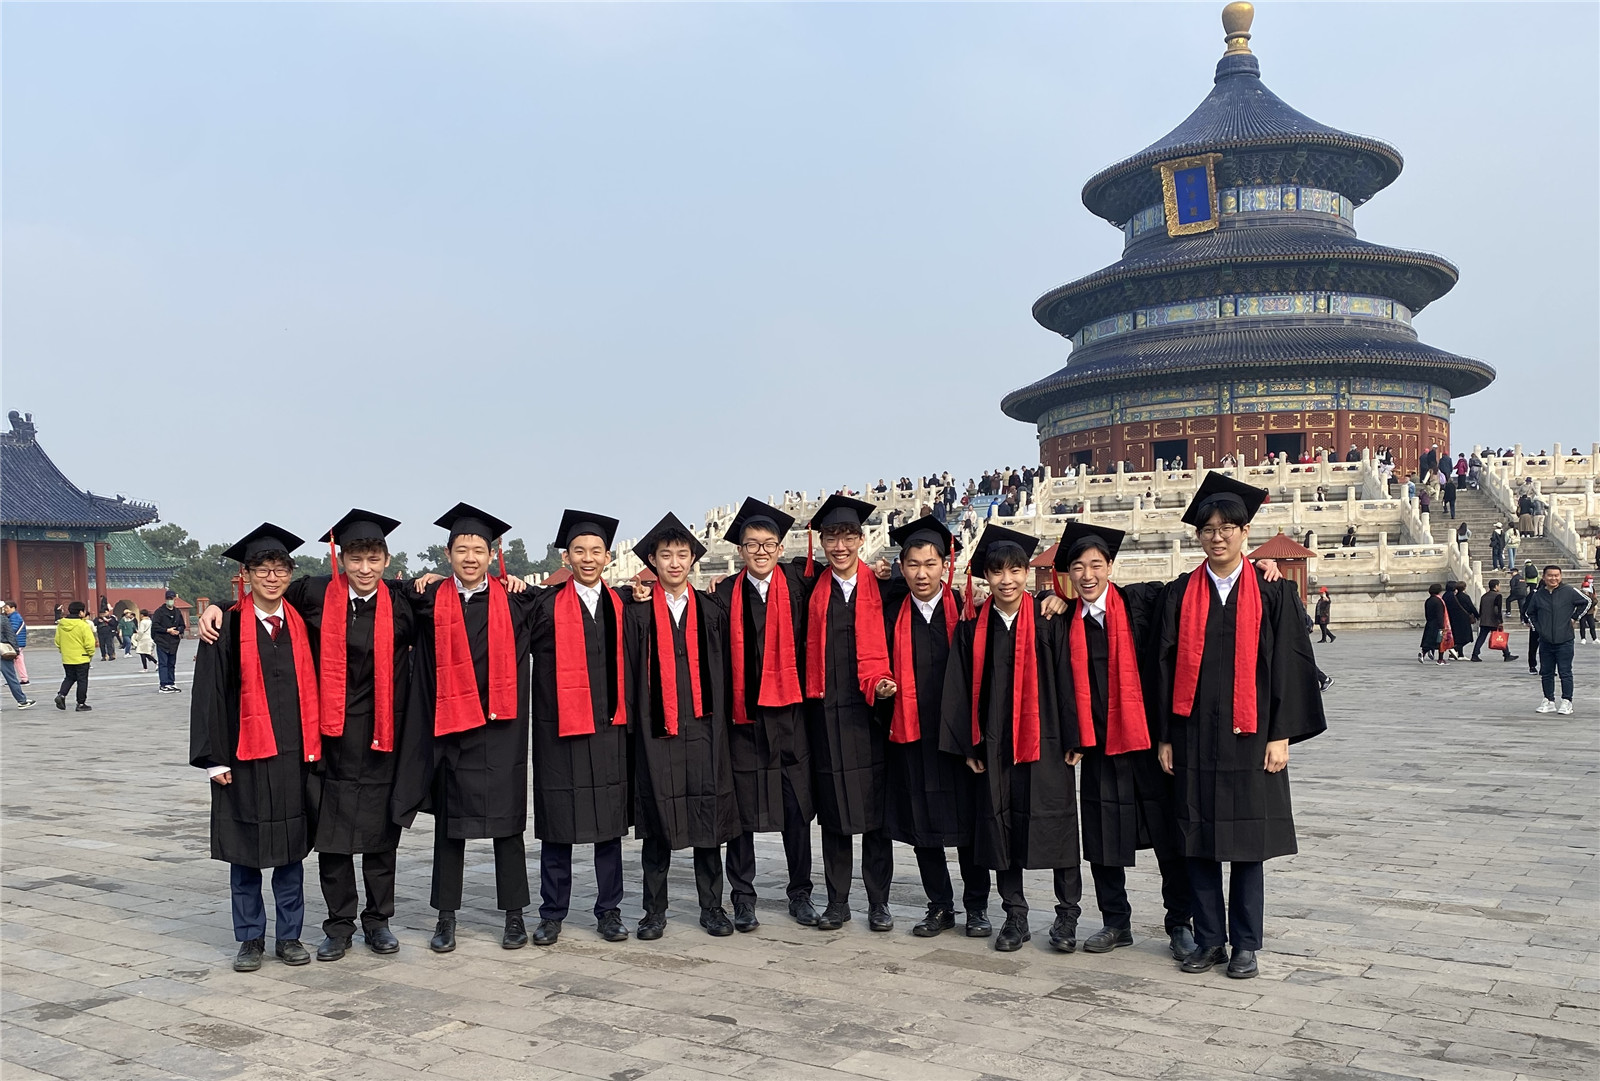 Eddy and his classmates from the Class of 2024 taking a group photo at Temple of Heaven